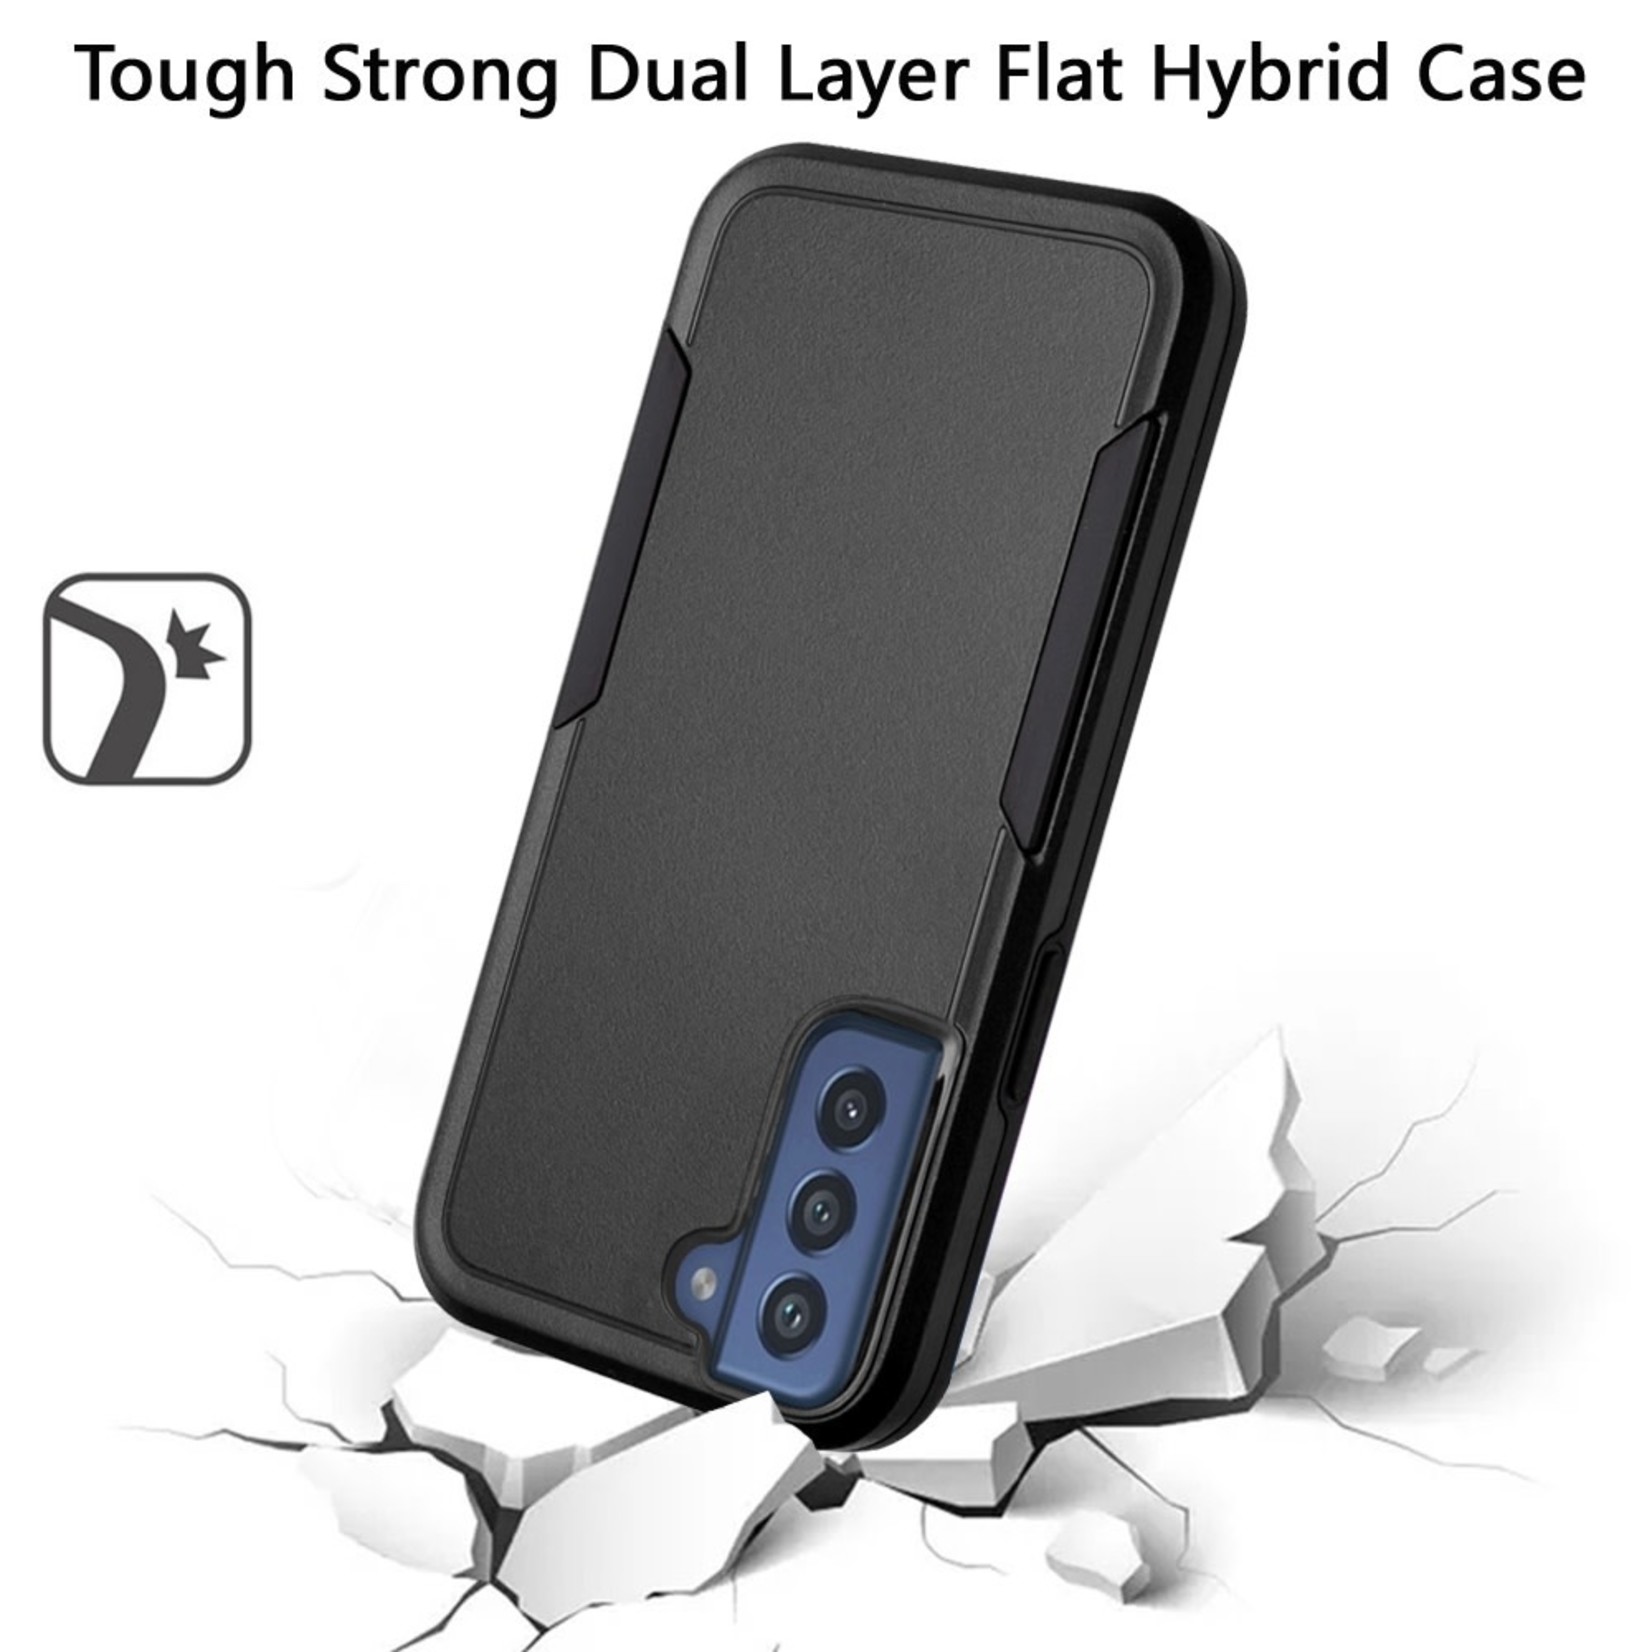 Samsung Tough Strong Dual Layer Flat Hybrid Case Cover - Black For Samsung Galaxy S22 Ultra